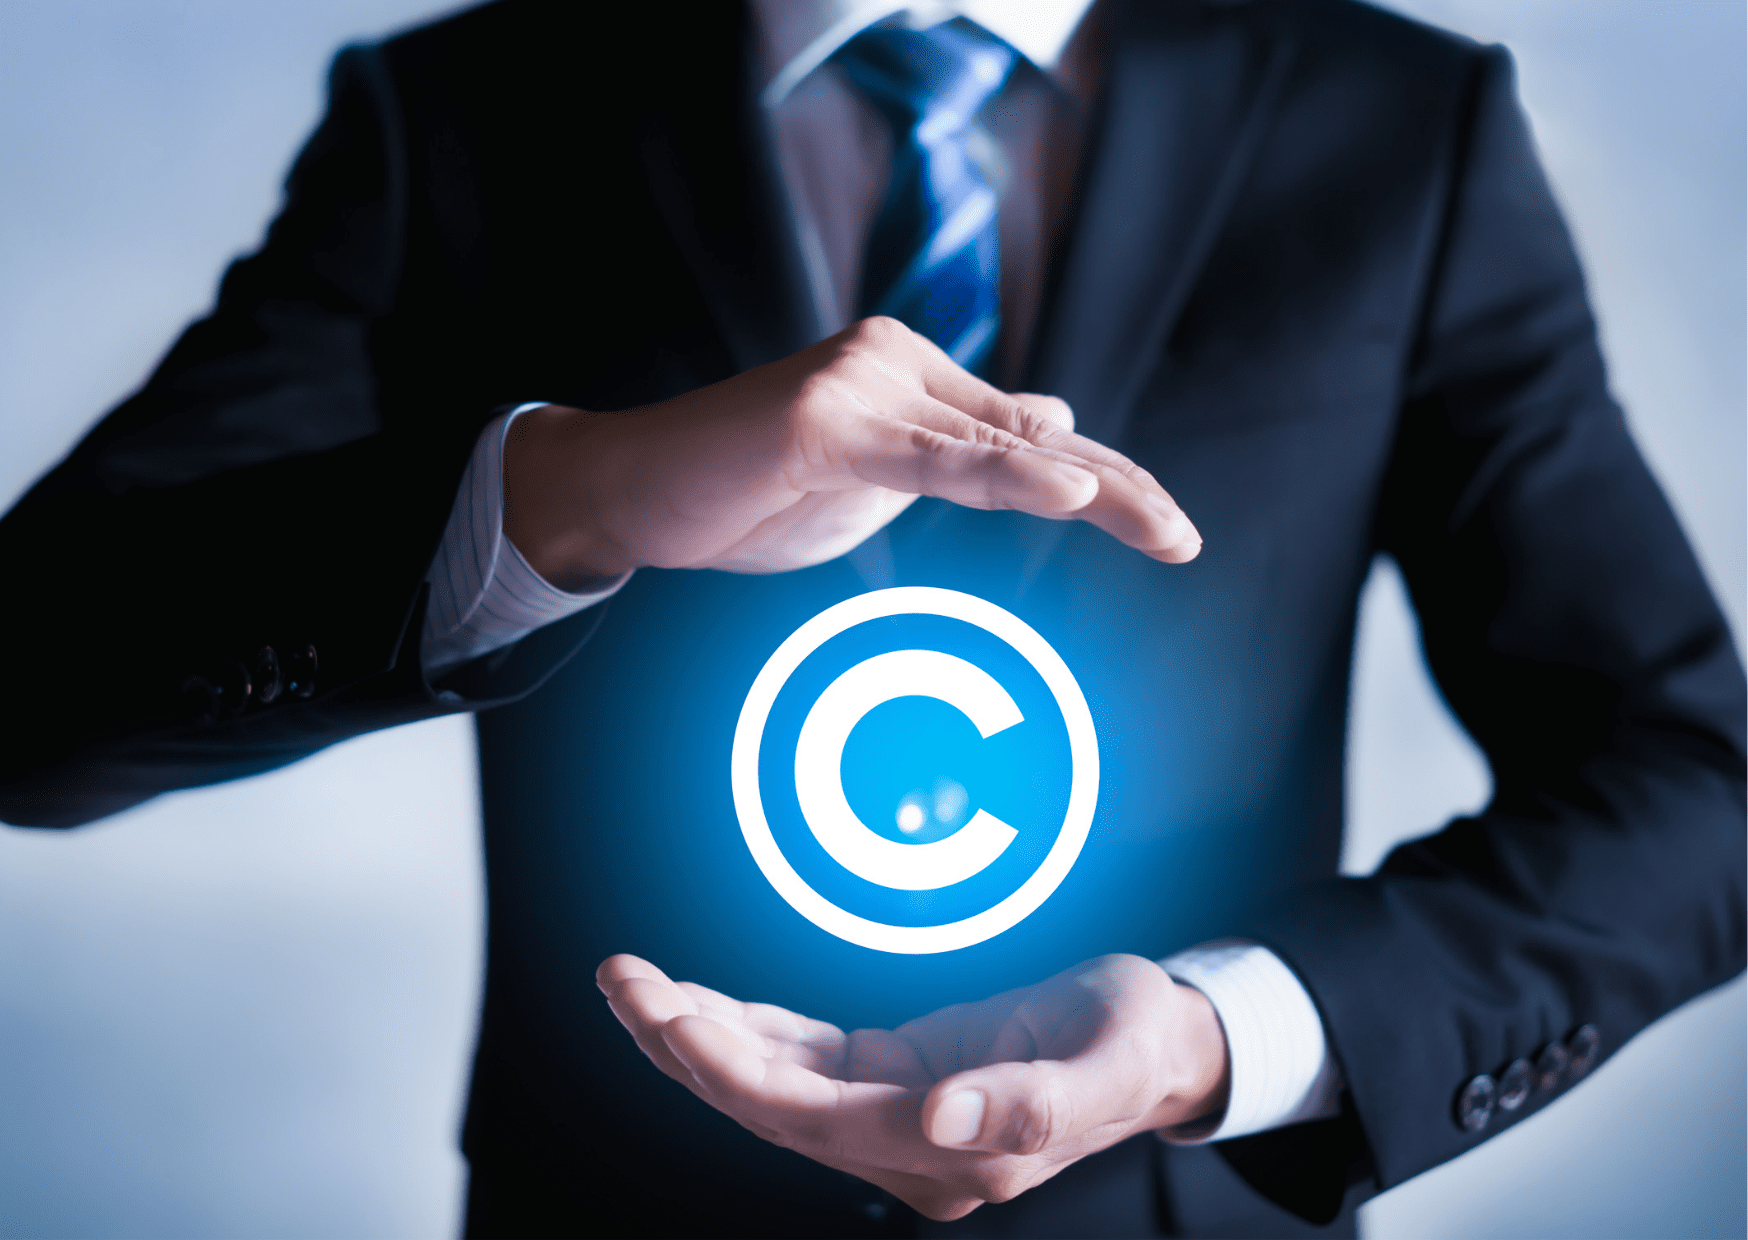 A human is protecting a copyright sign symbolizing intellectual property safeguarding in startups